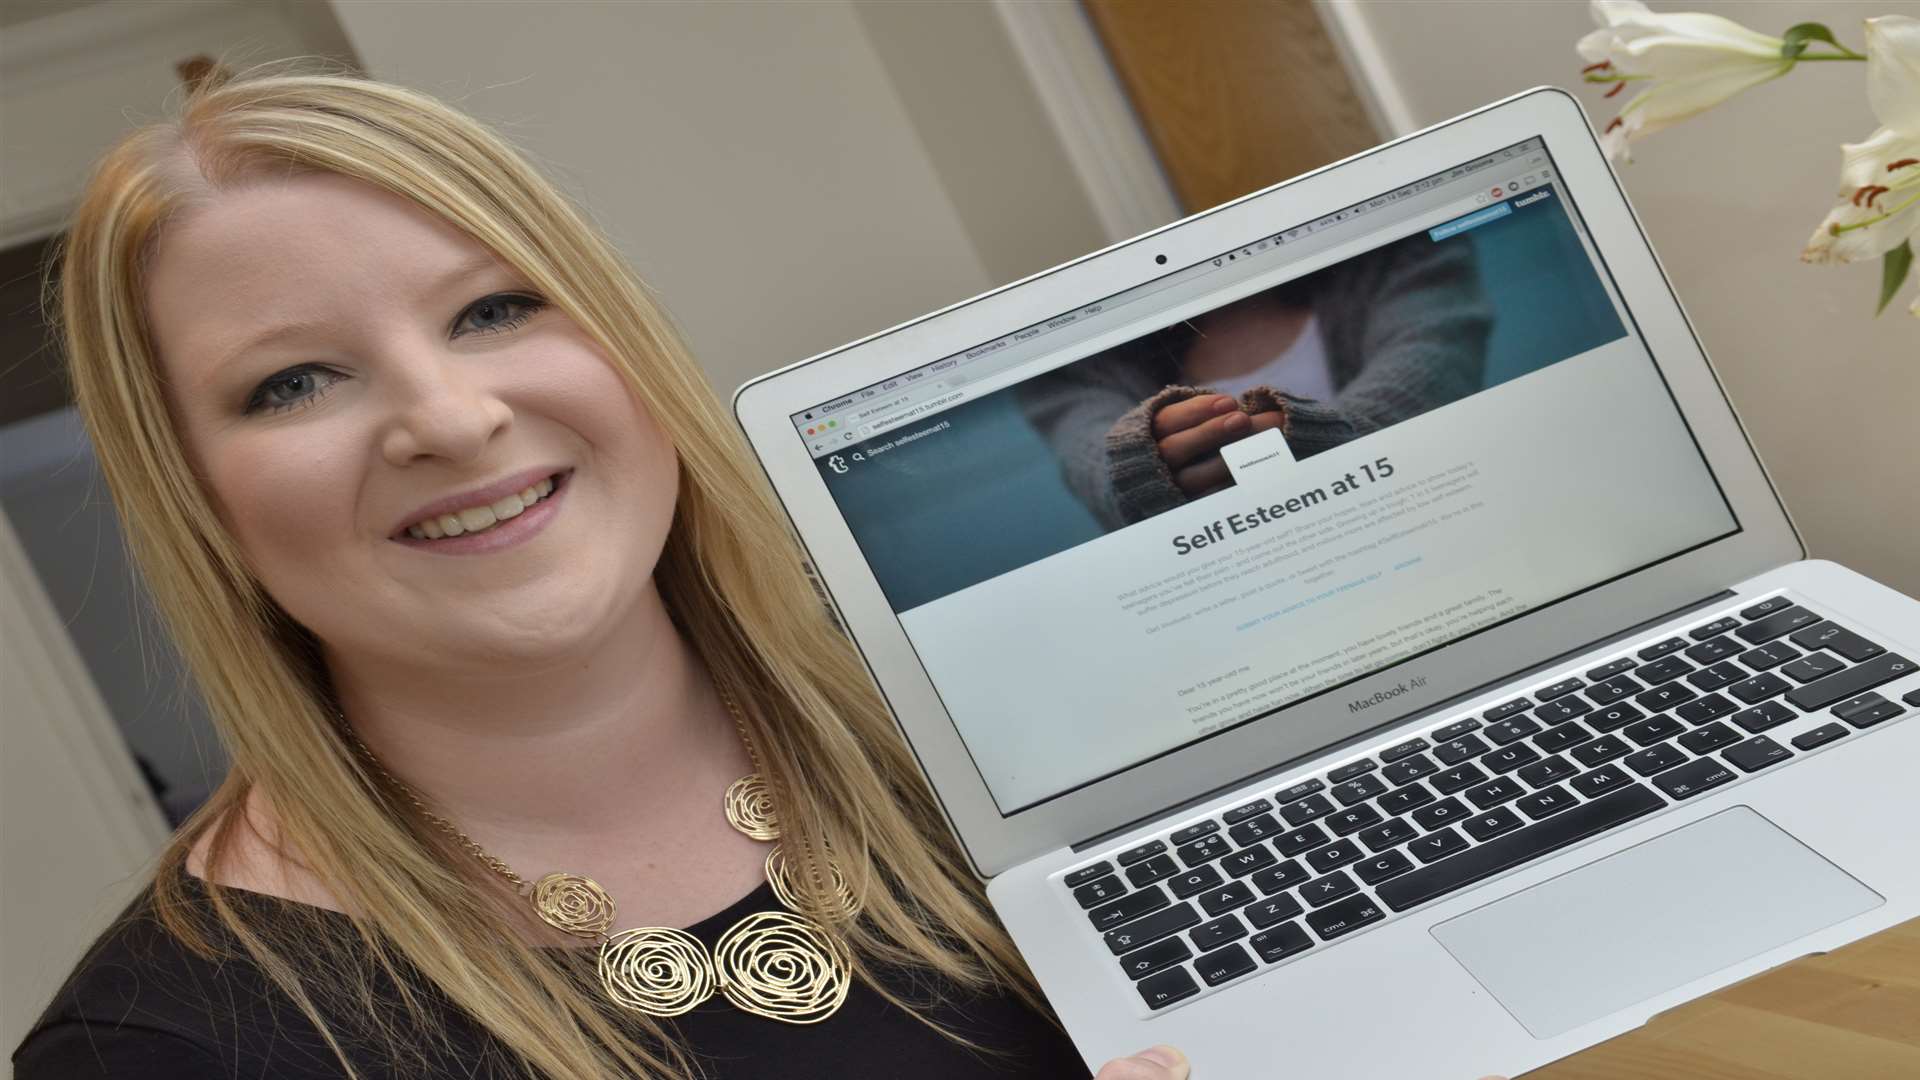 Chelsea Reay set up the project to try and help boost self-esteem in teenagers